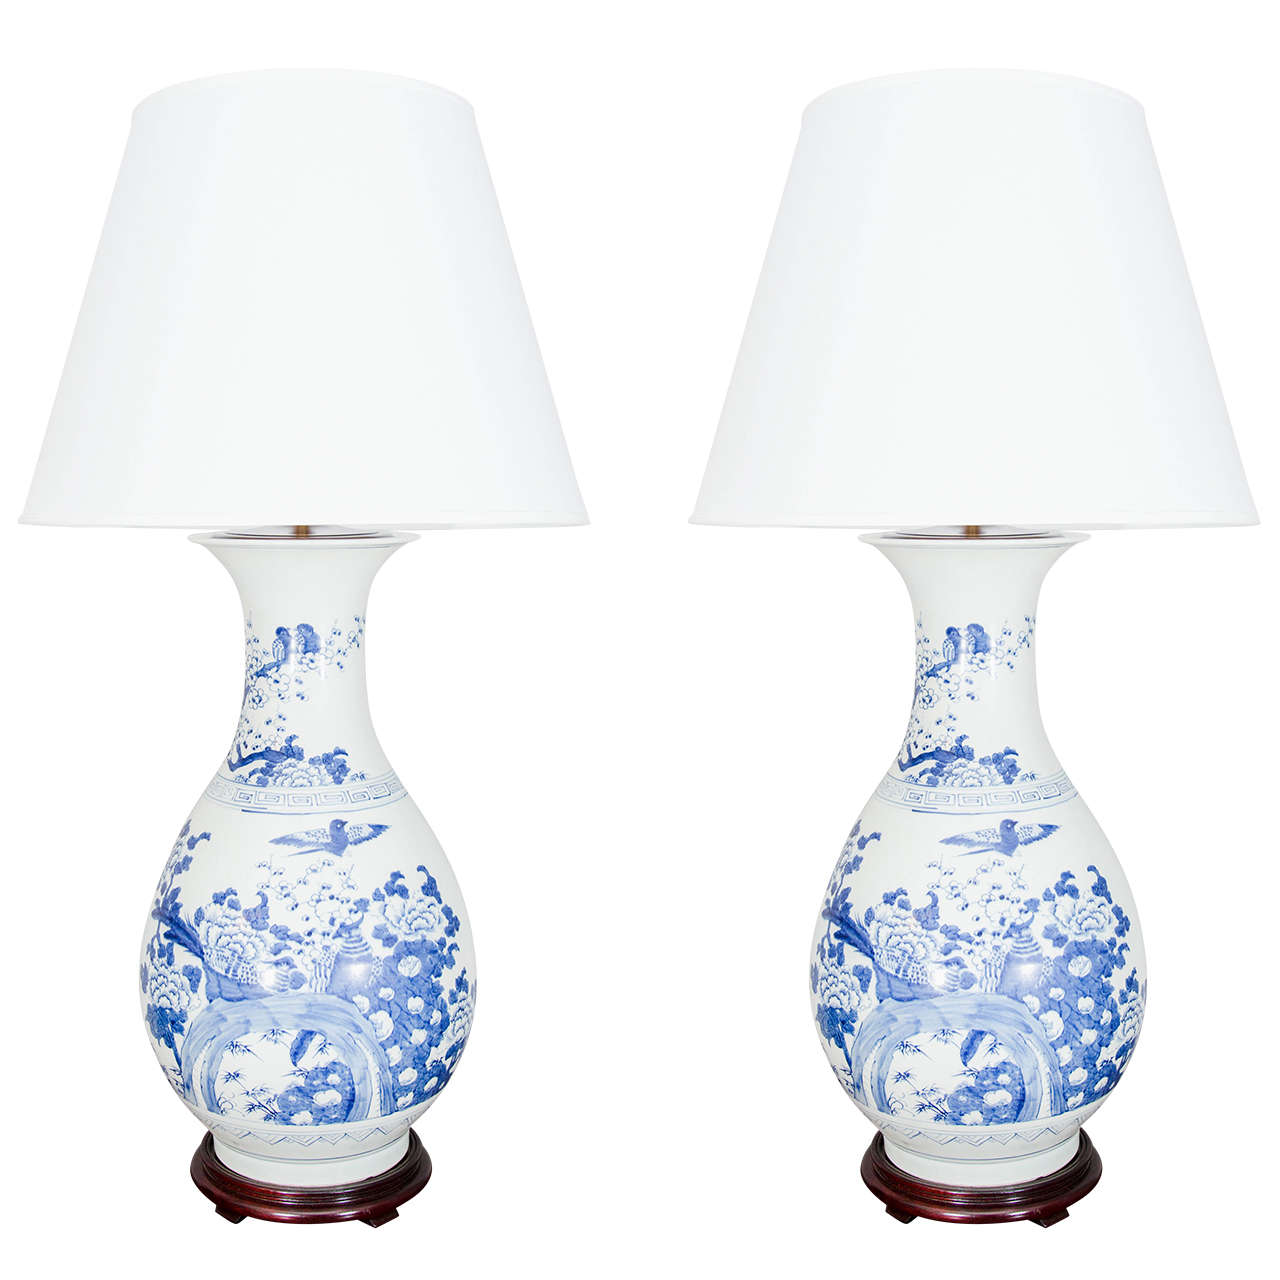 Pair of large blue and white porcelain vases wired as lamps. Shades available separately.